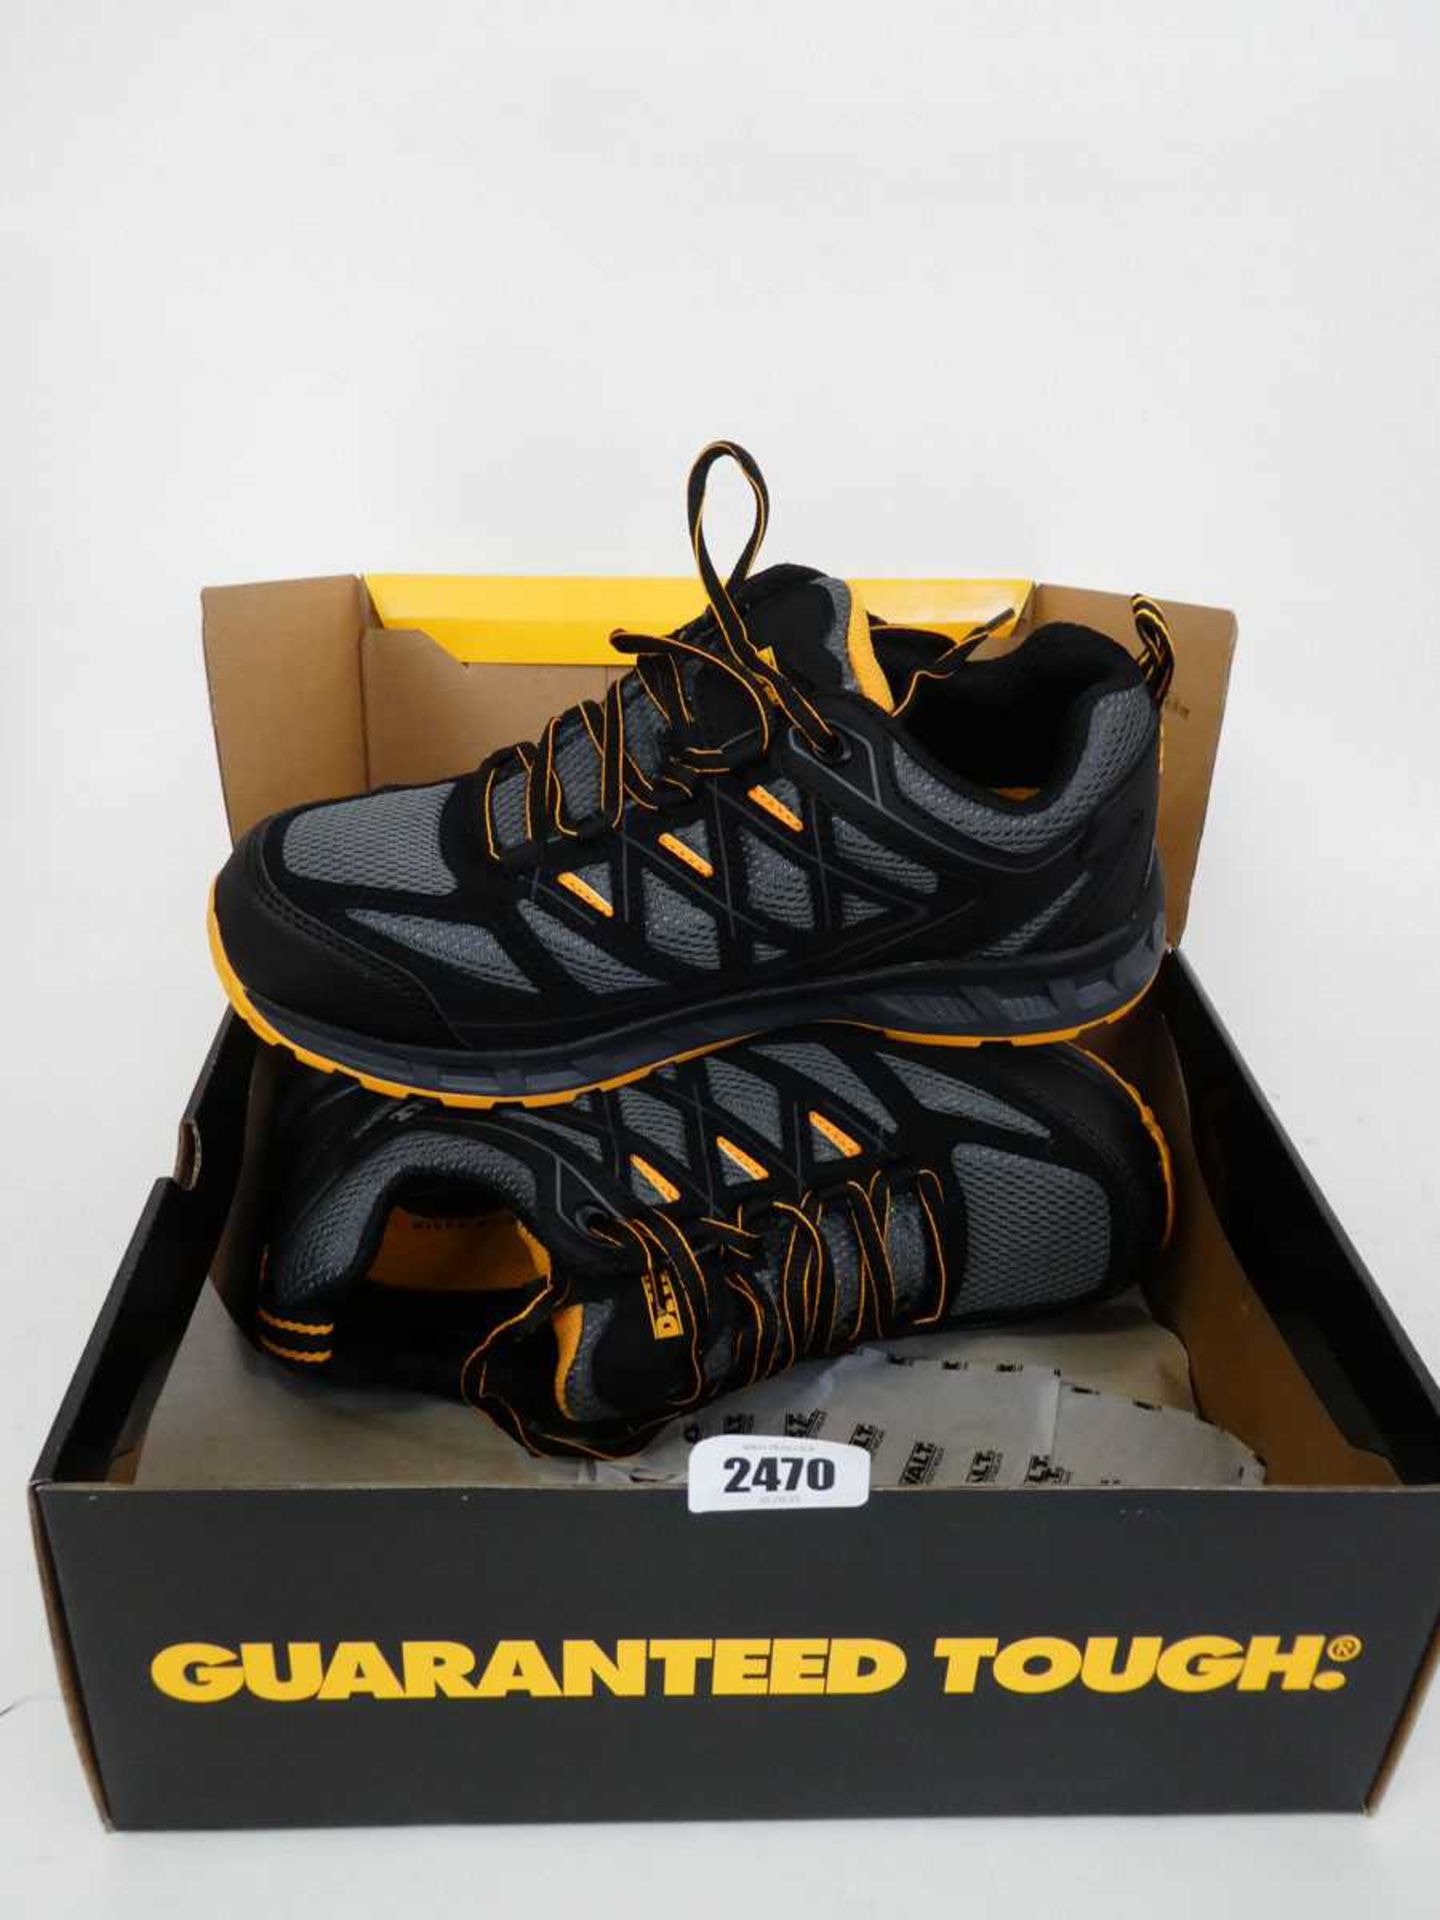 Boxed pair of DeWalt steel toe safety trainers (size 8)